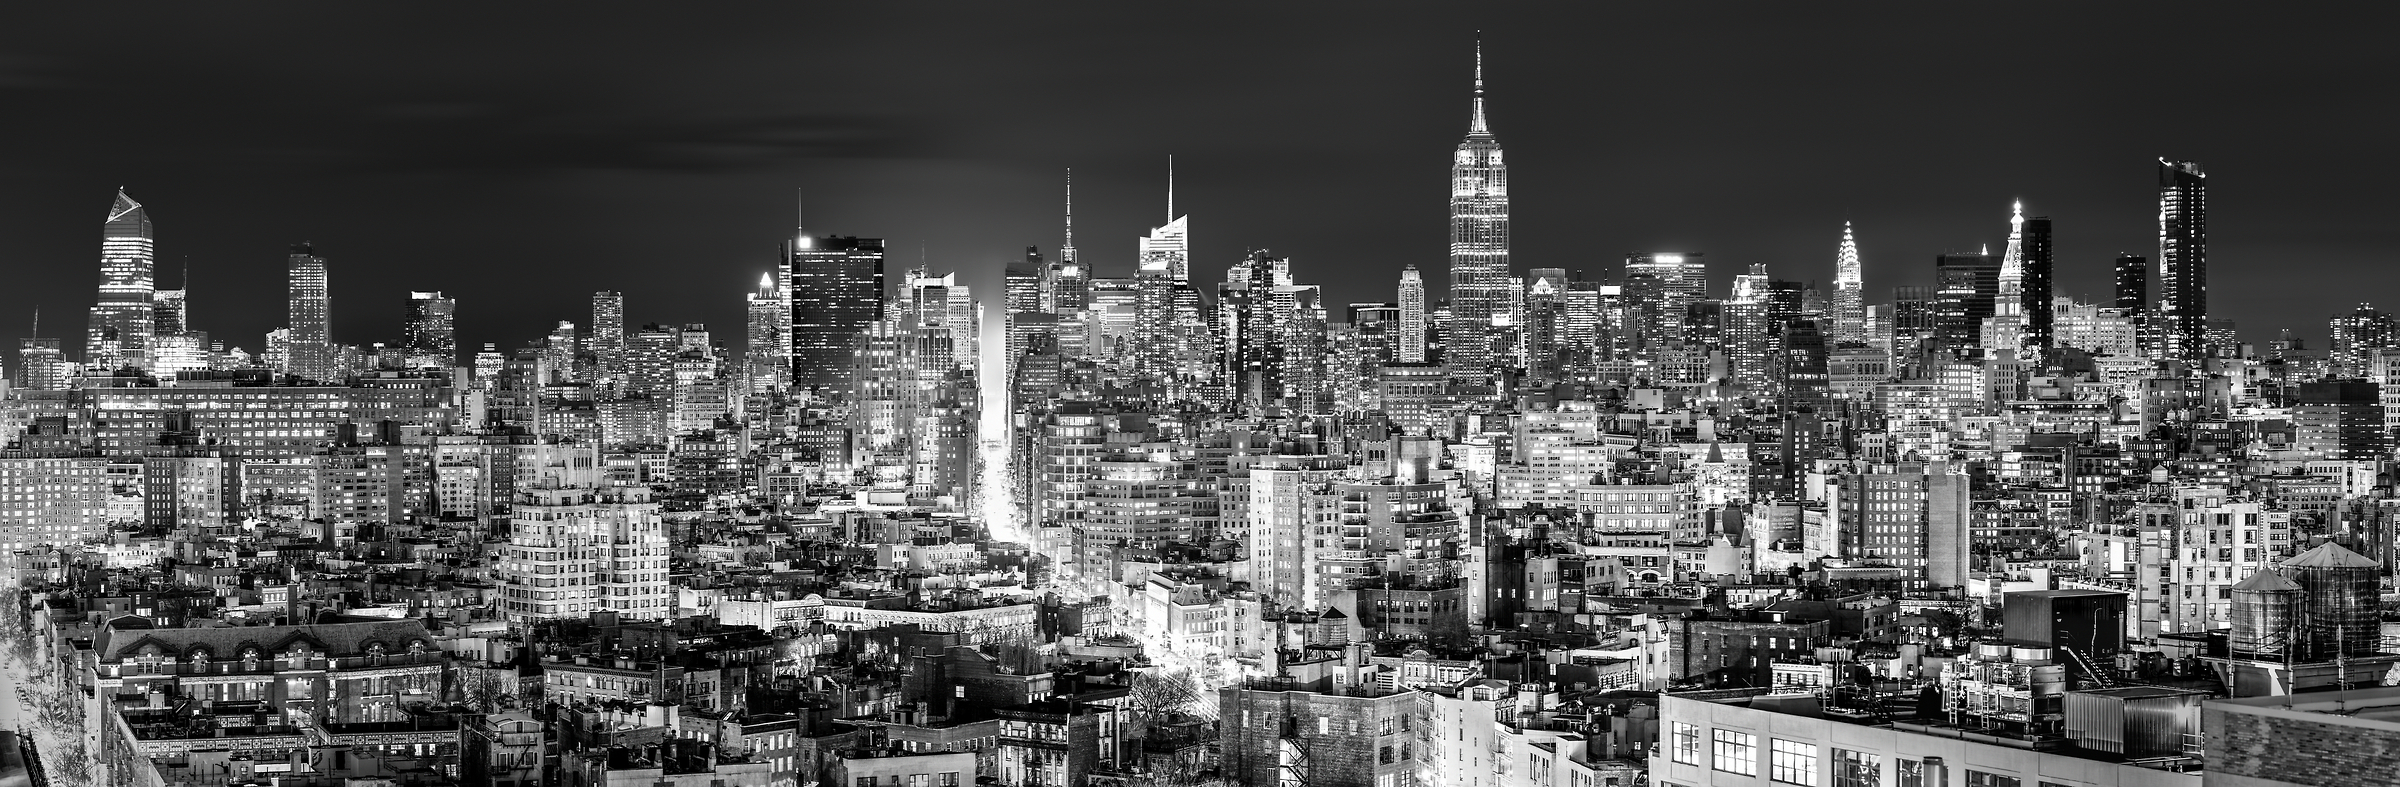 2,392 megapixels! A very high resolution, large-format VAST photo print of the Manhattan, New York City skyline at night; cityscape photo created by Dan Piech.